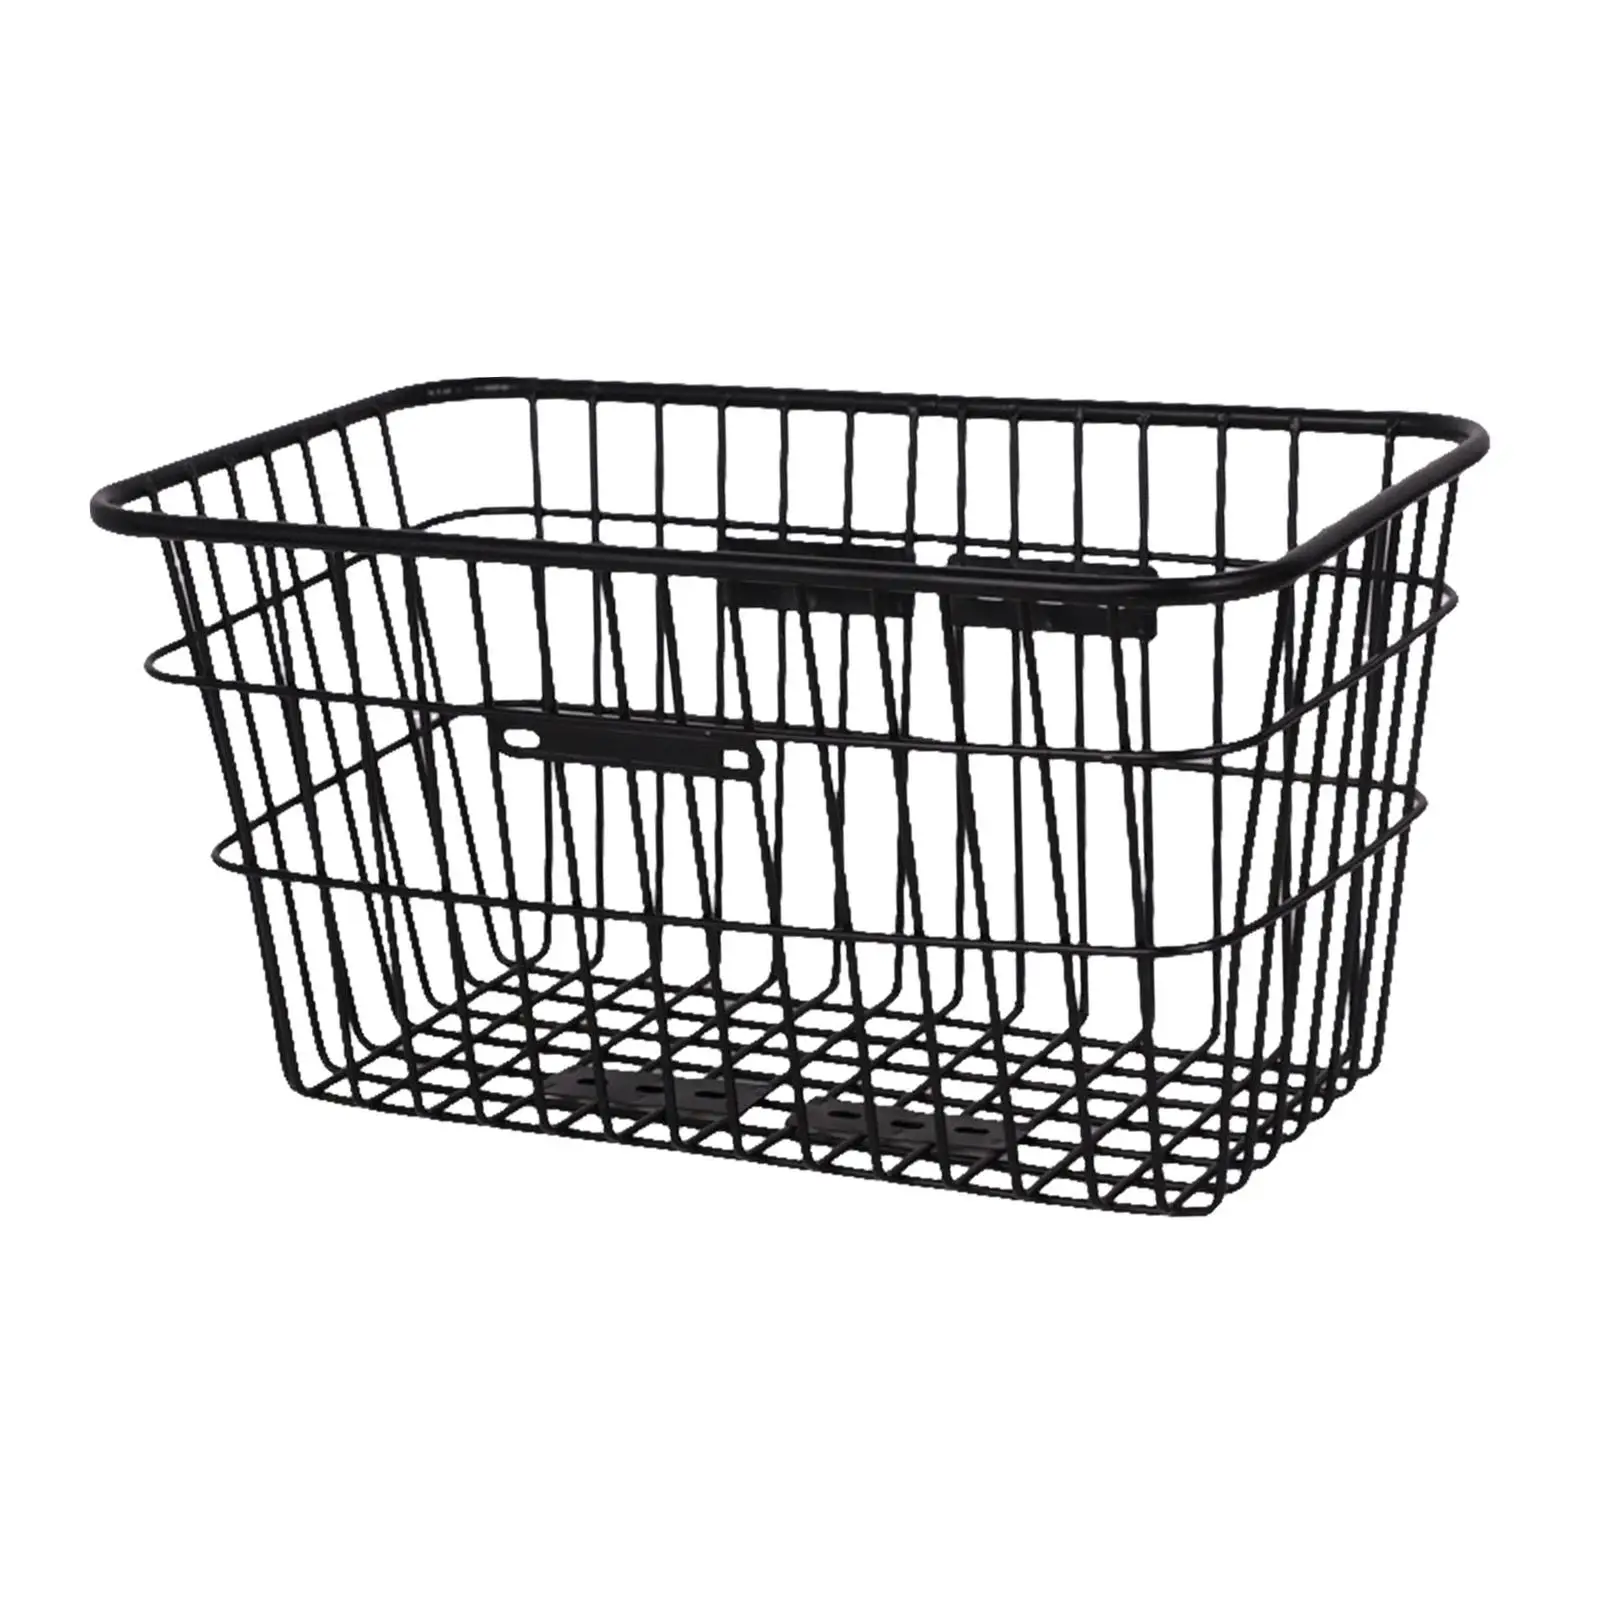 Bicycle Basket Large Space Front/Rear Metal Men Women Bicycle Frame Basket for Picnic Grocery Shopping Outdoor Bike Accessories